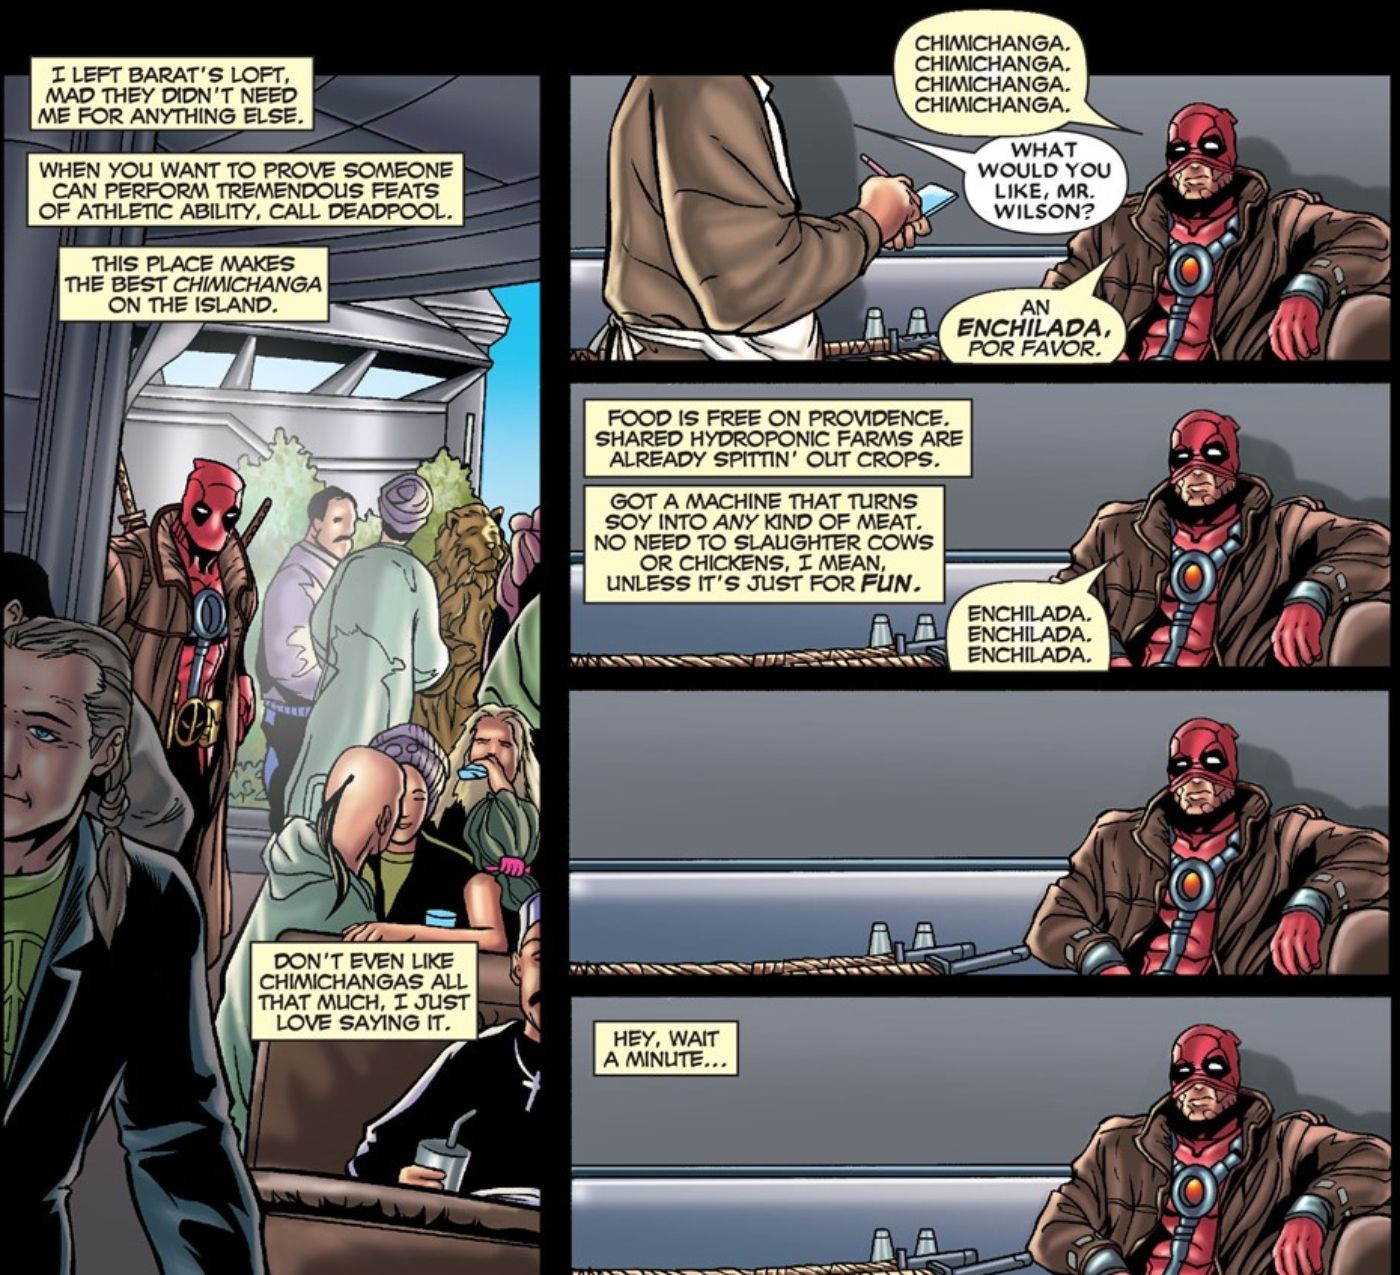 Deadpool admitting that he doesn't even like chimichangas.